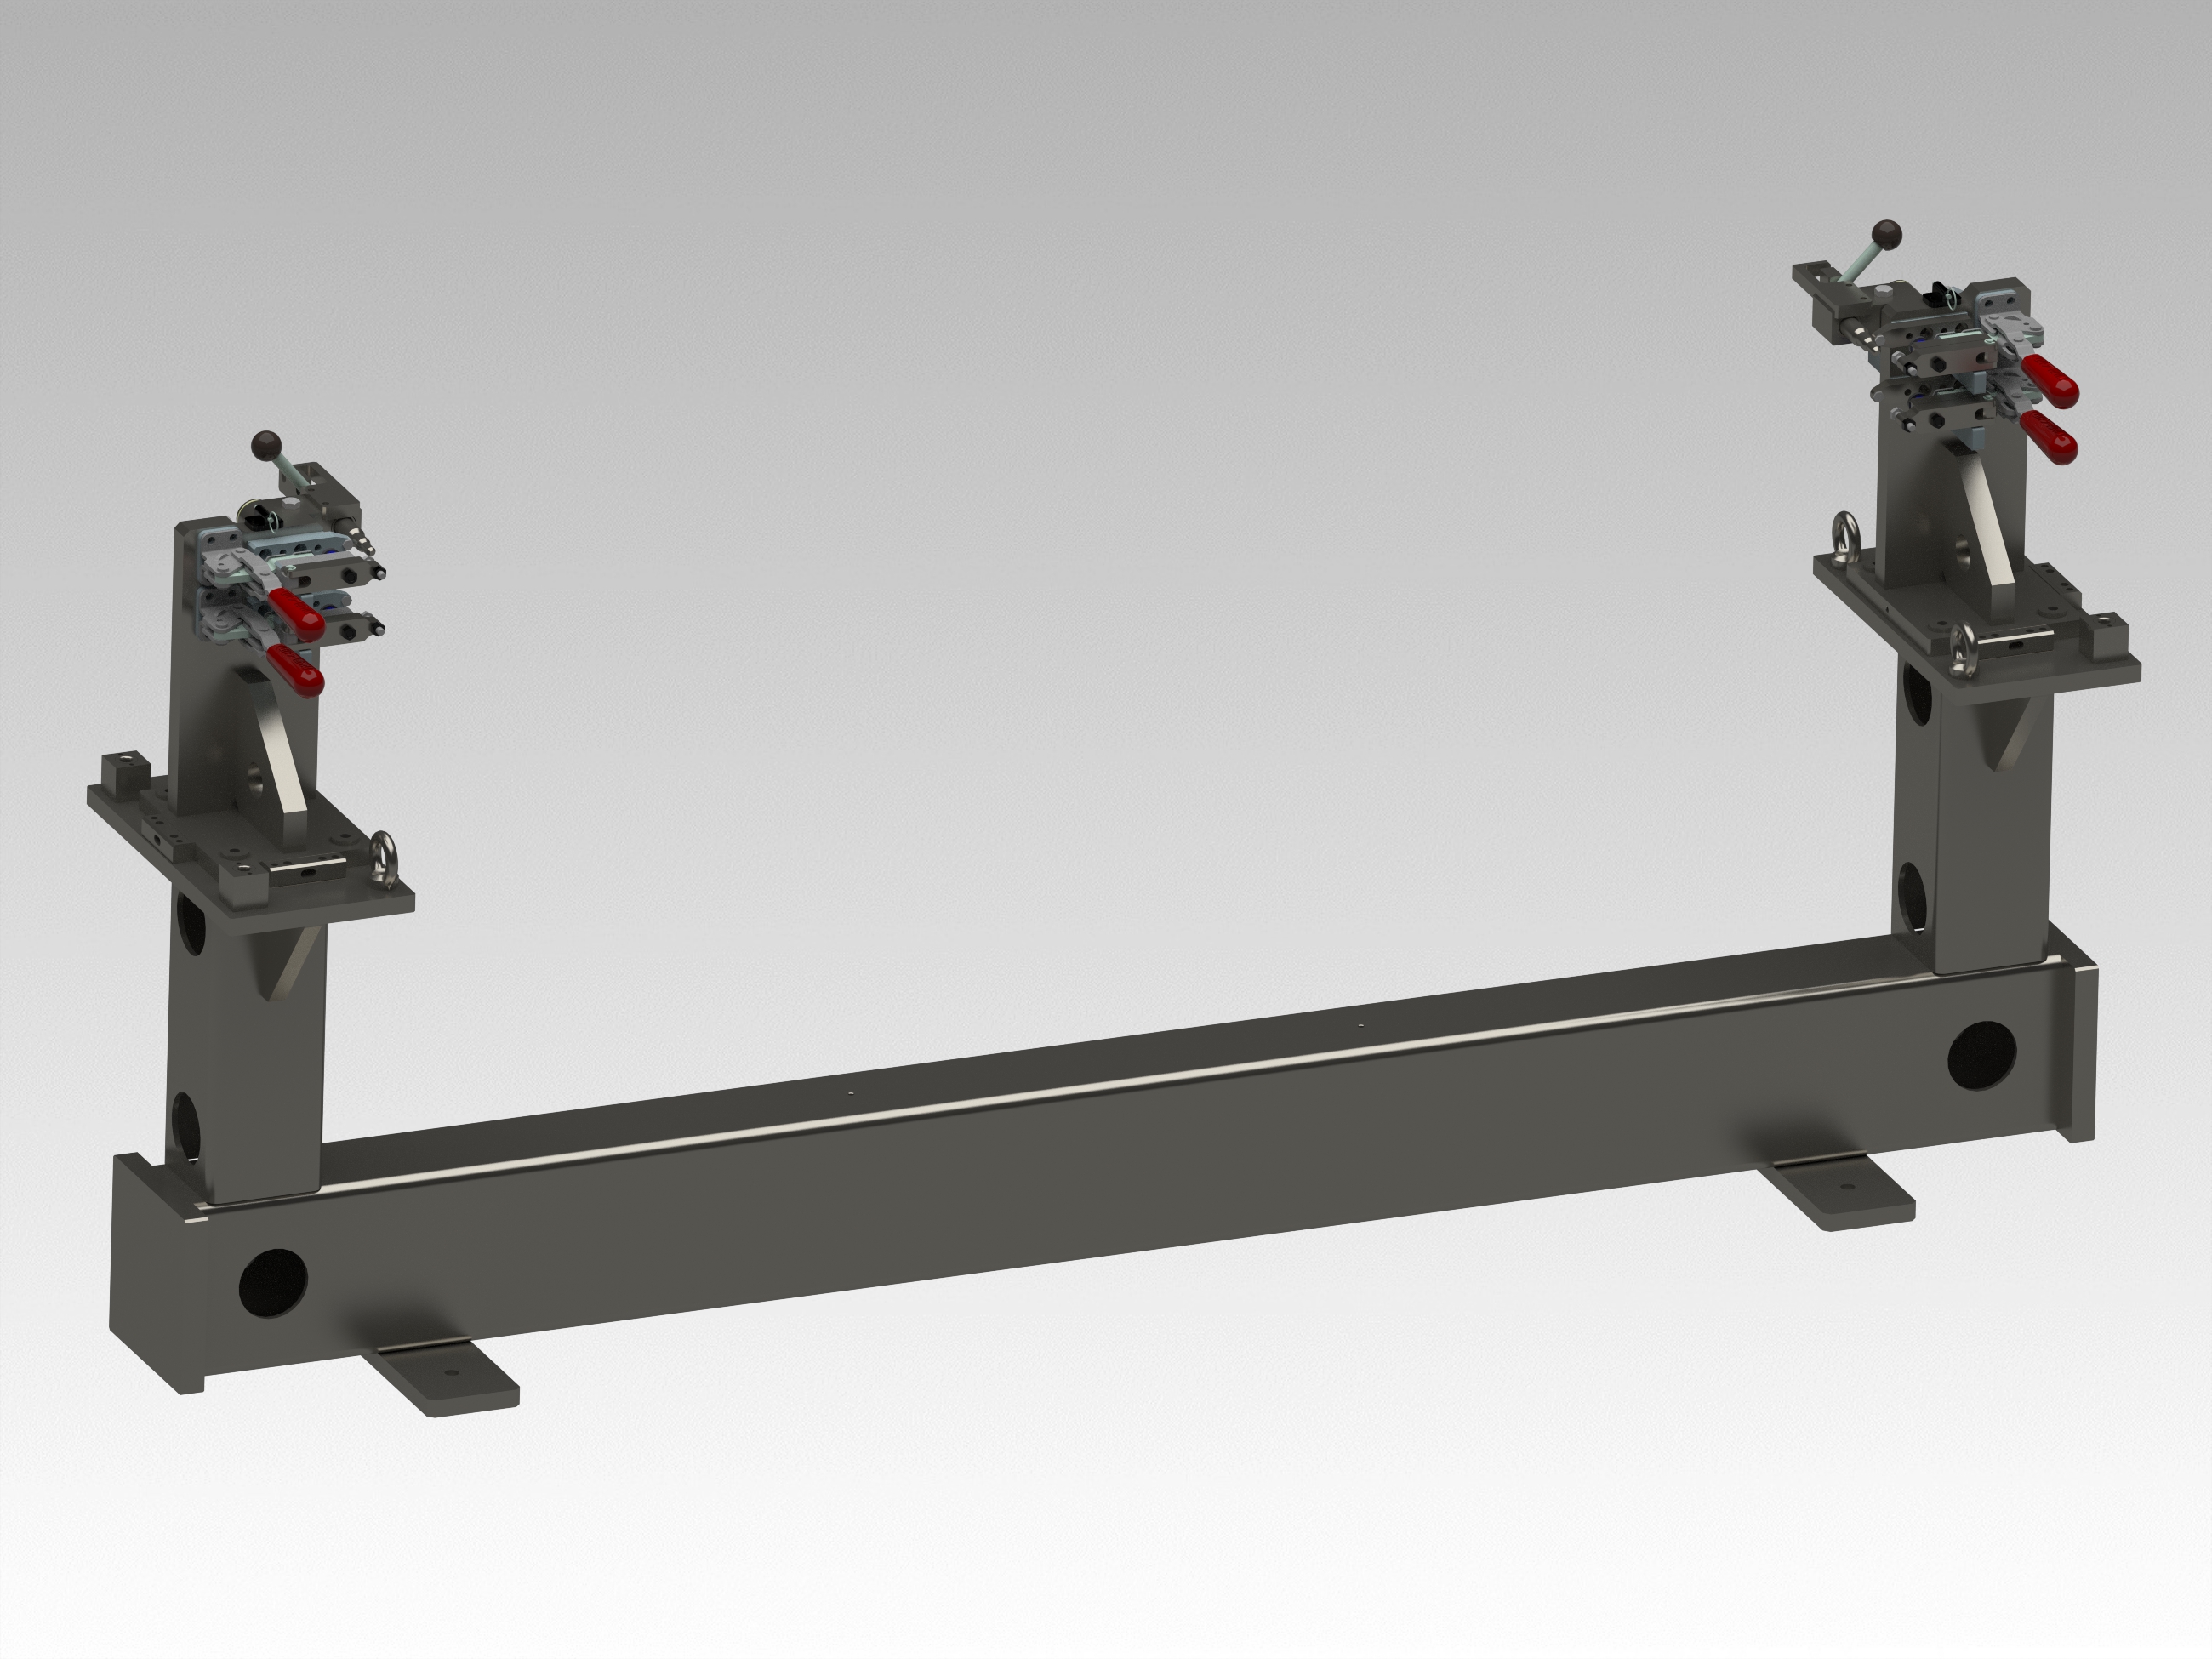 cmm fixture design with manual clamps